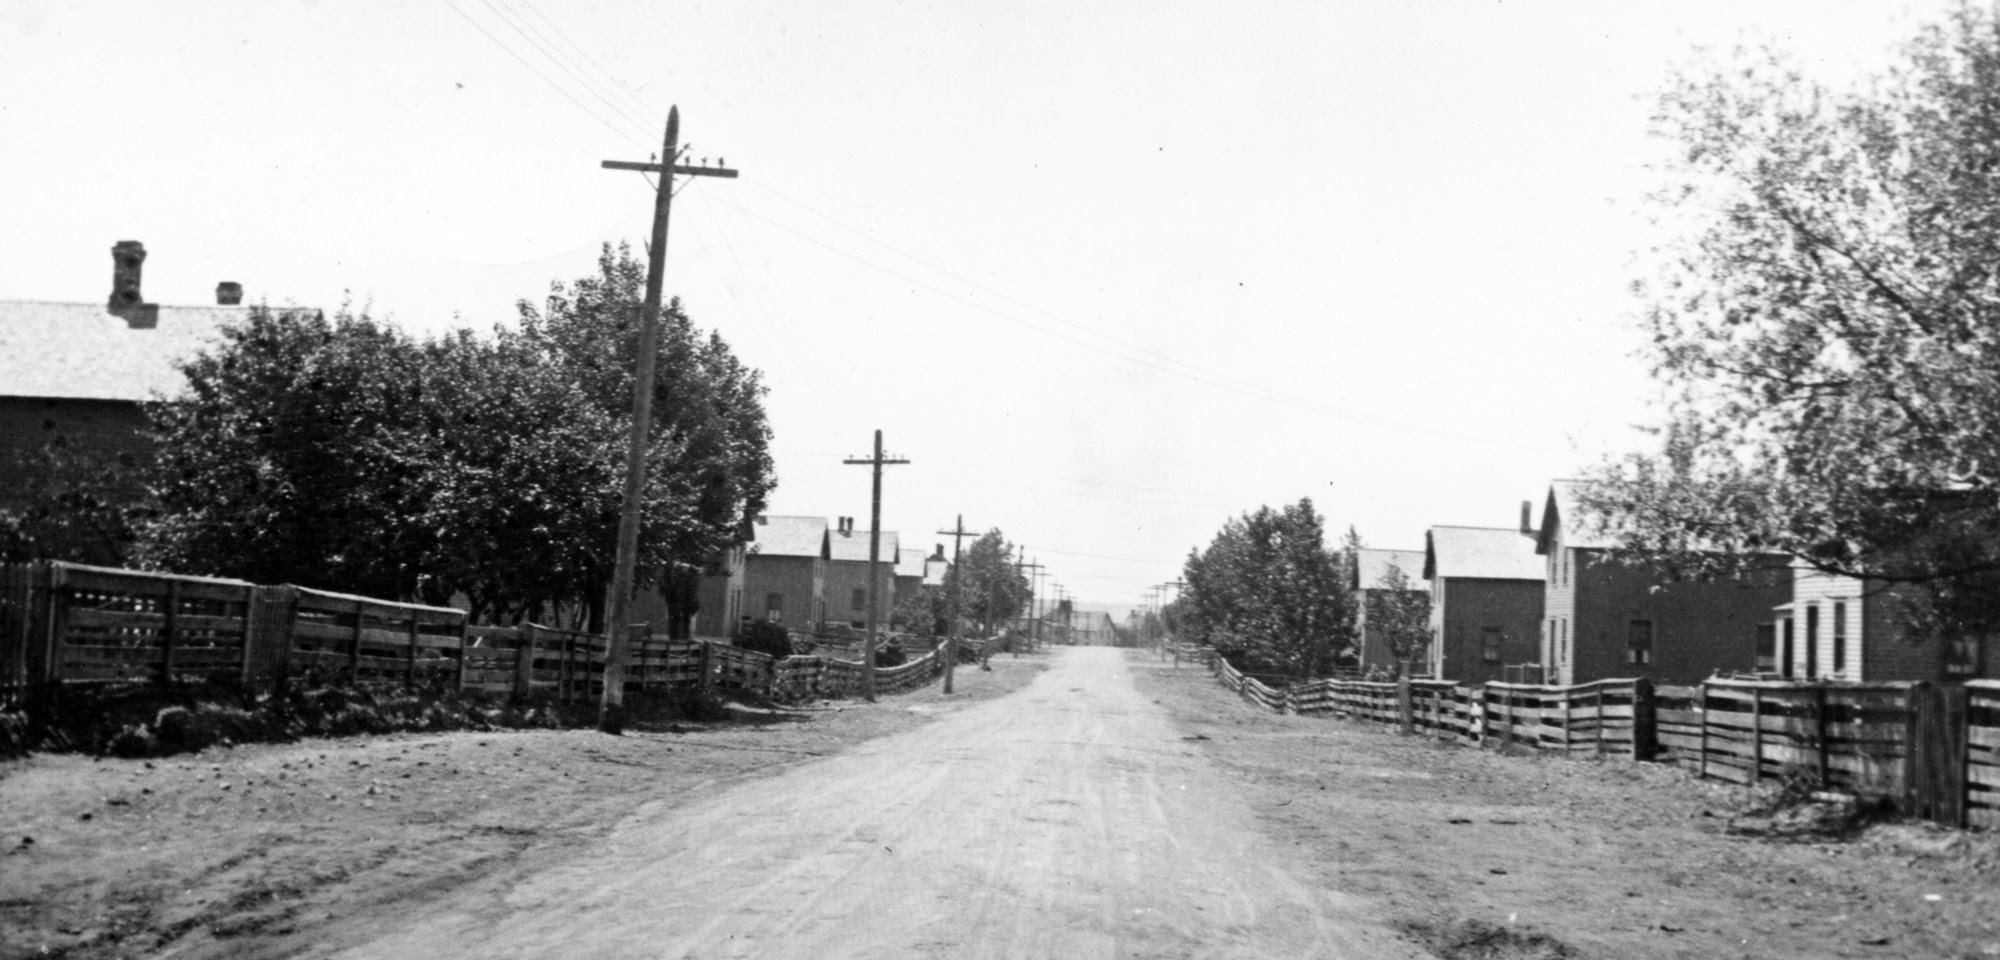 Two-story homes lined the streets of the mining town of Mohawk as shown in this photo from 1921. (photo courtesy of Archives of Michigan)